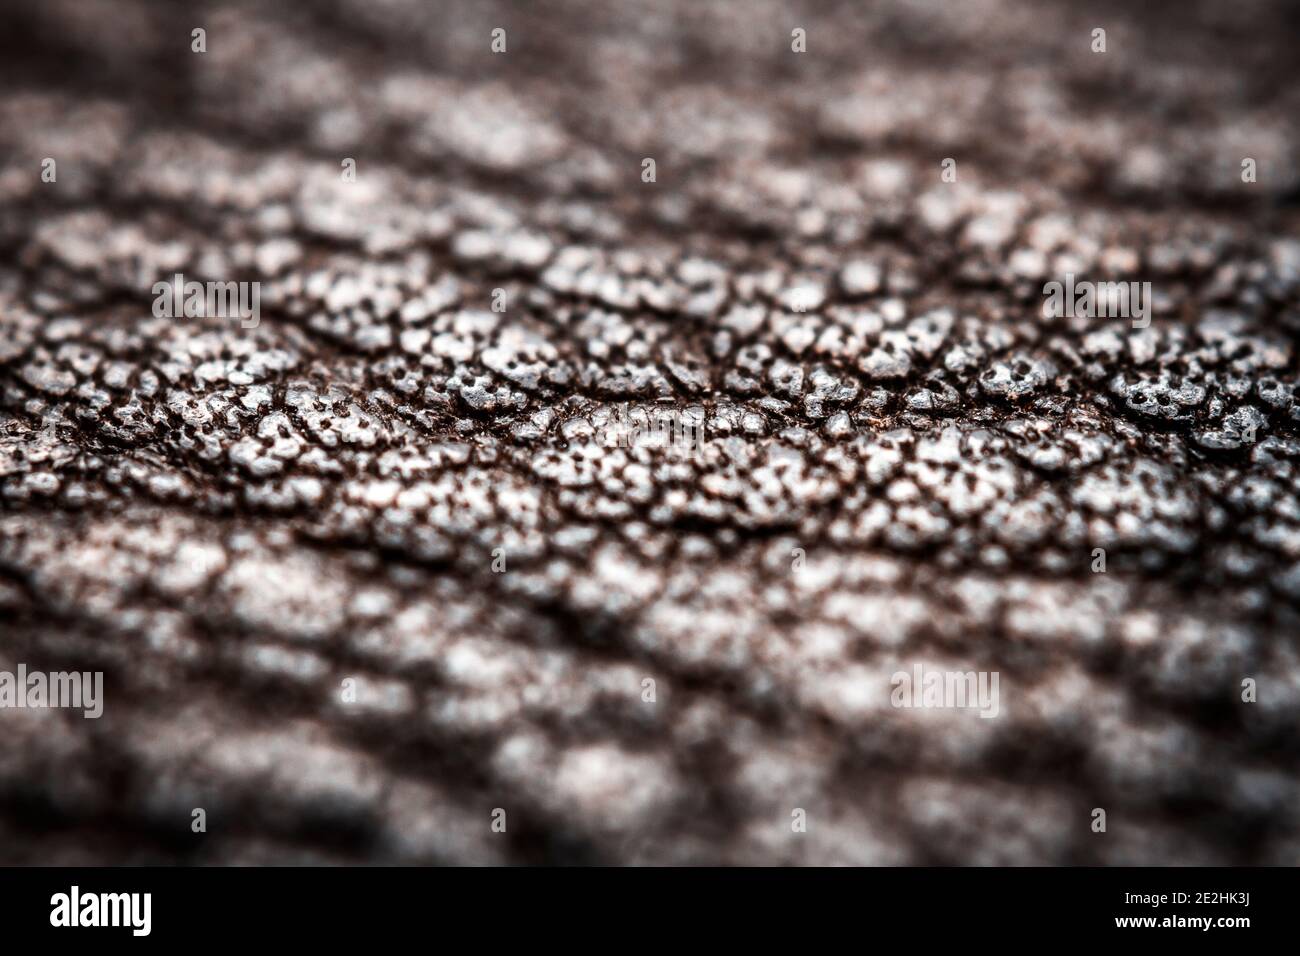 Extreme closeup of a leather, shallow deph of field. Macro for brown leather. Stock Photo